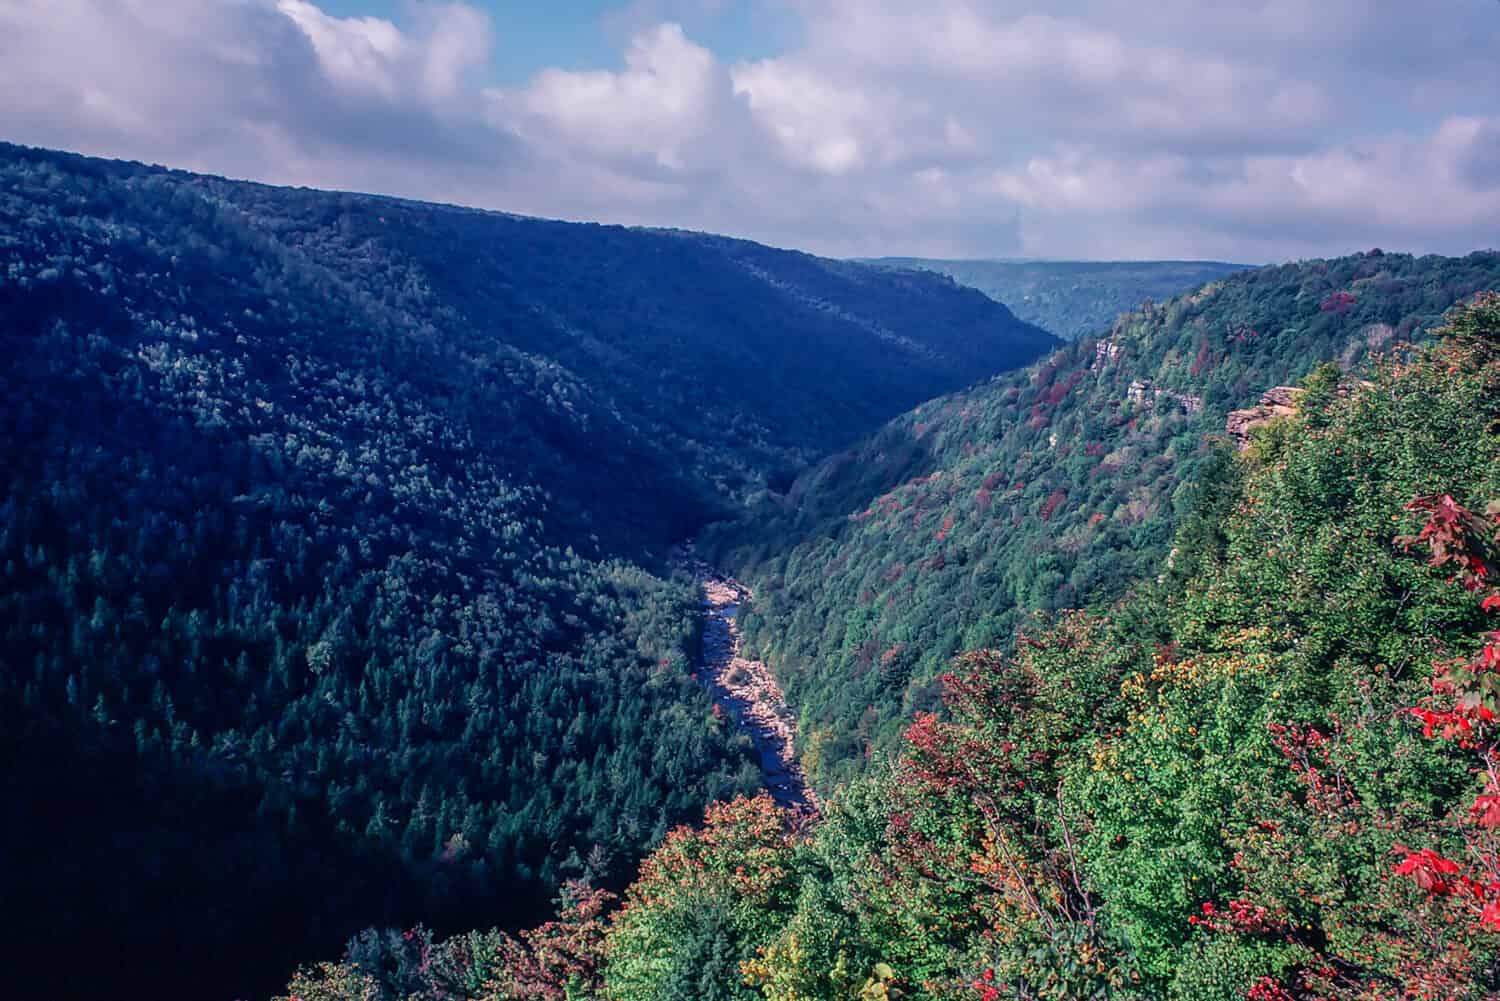 View overlooking the Trough Hampshire County West Virginia USA - Wooded gorge with Autumn foliage, distant creek bed between mountain ridges